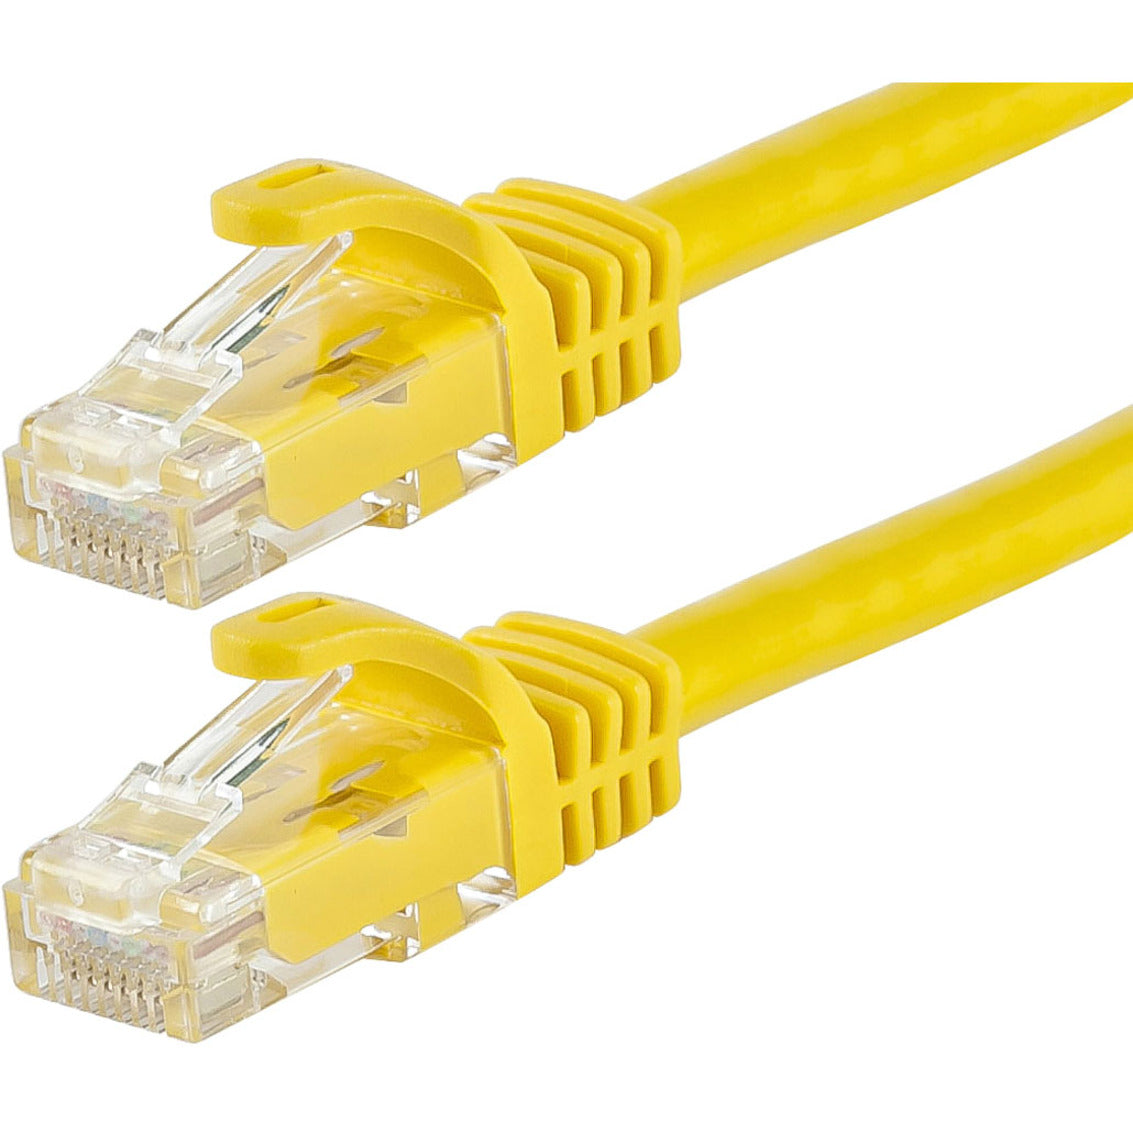 Monoprice 11258 FLEXboot Series Cat6 24AWG UTP Ethernet Network Patch Cable, 14ft Yellow